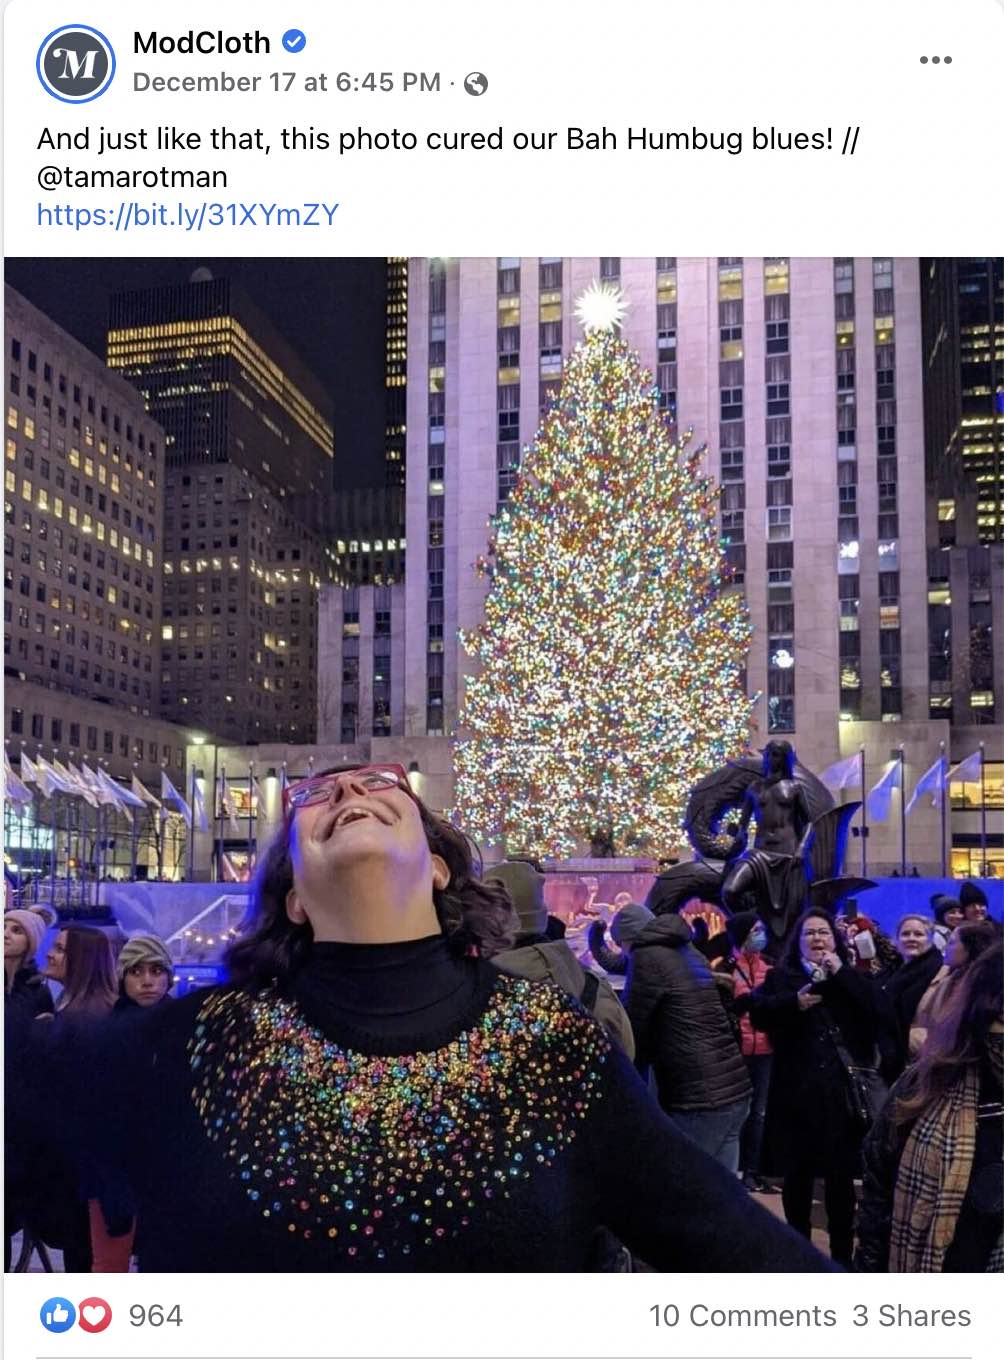 Image from Facebook of a photo from ModCloth's page showing a female outdoors in a city in front of a Christmas tree